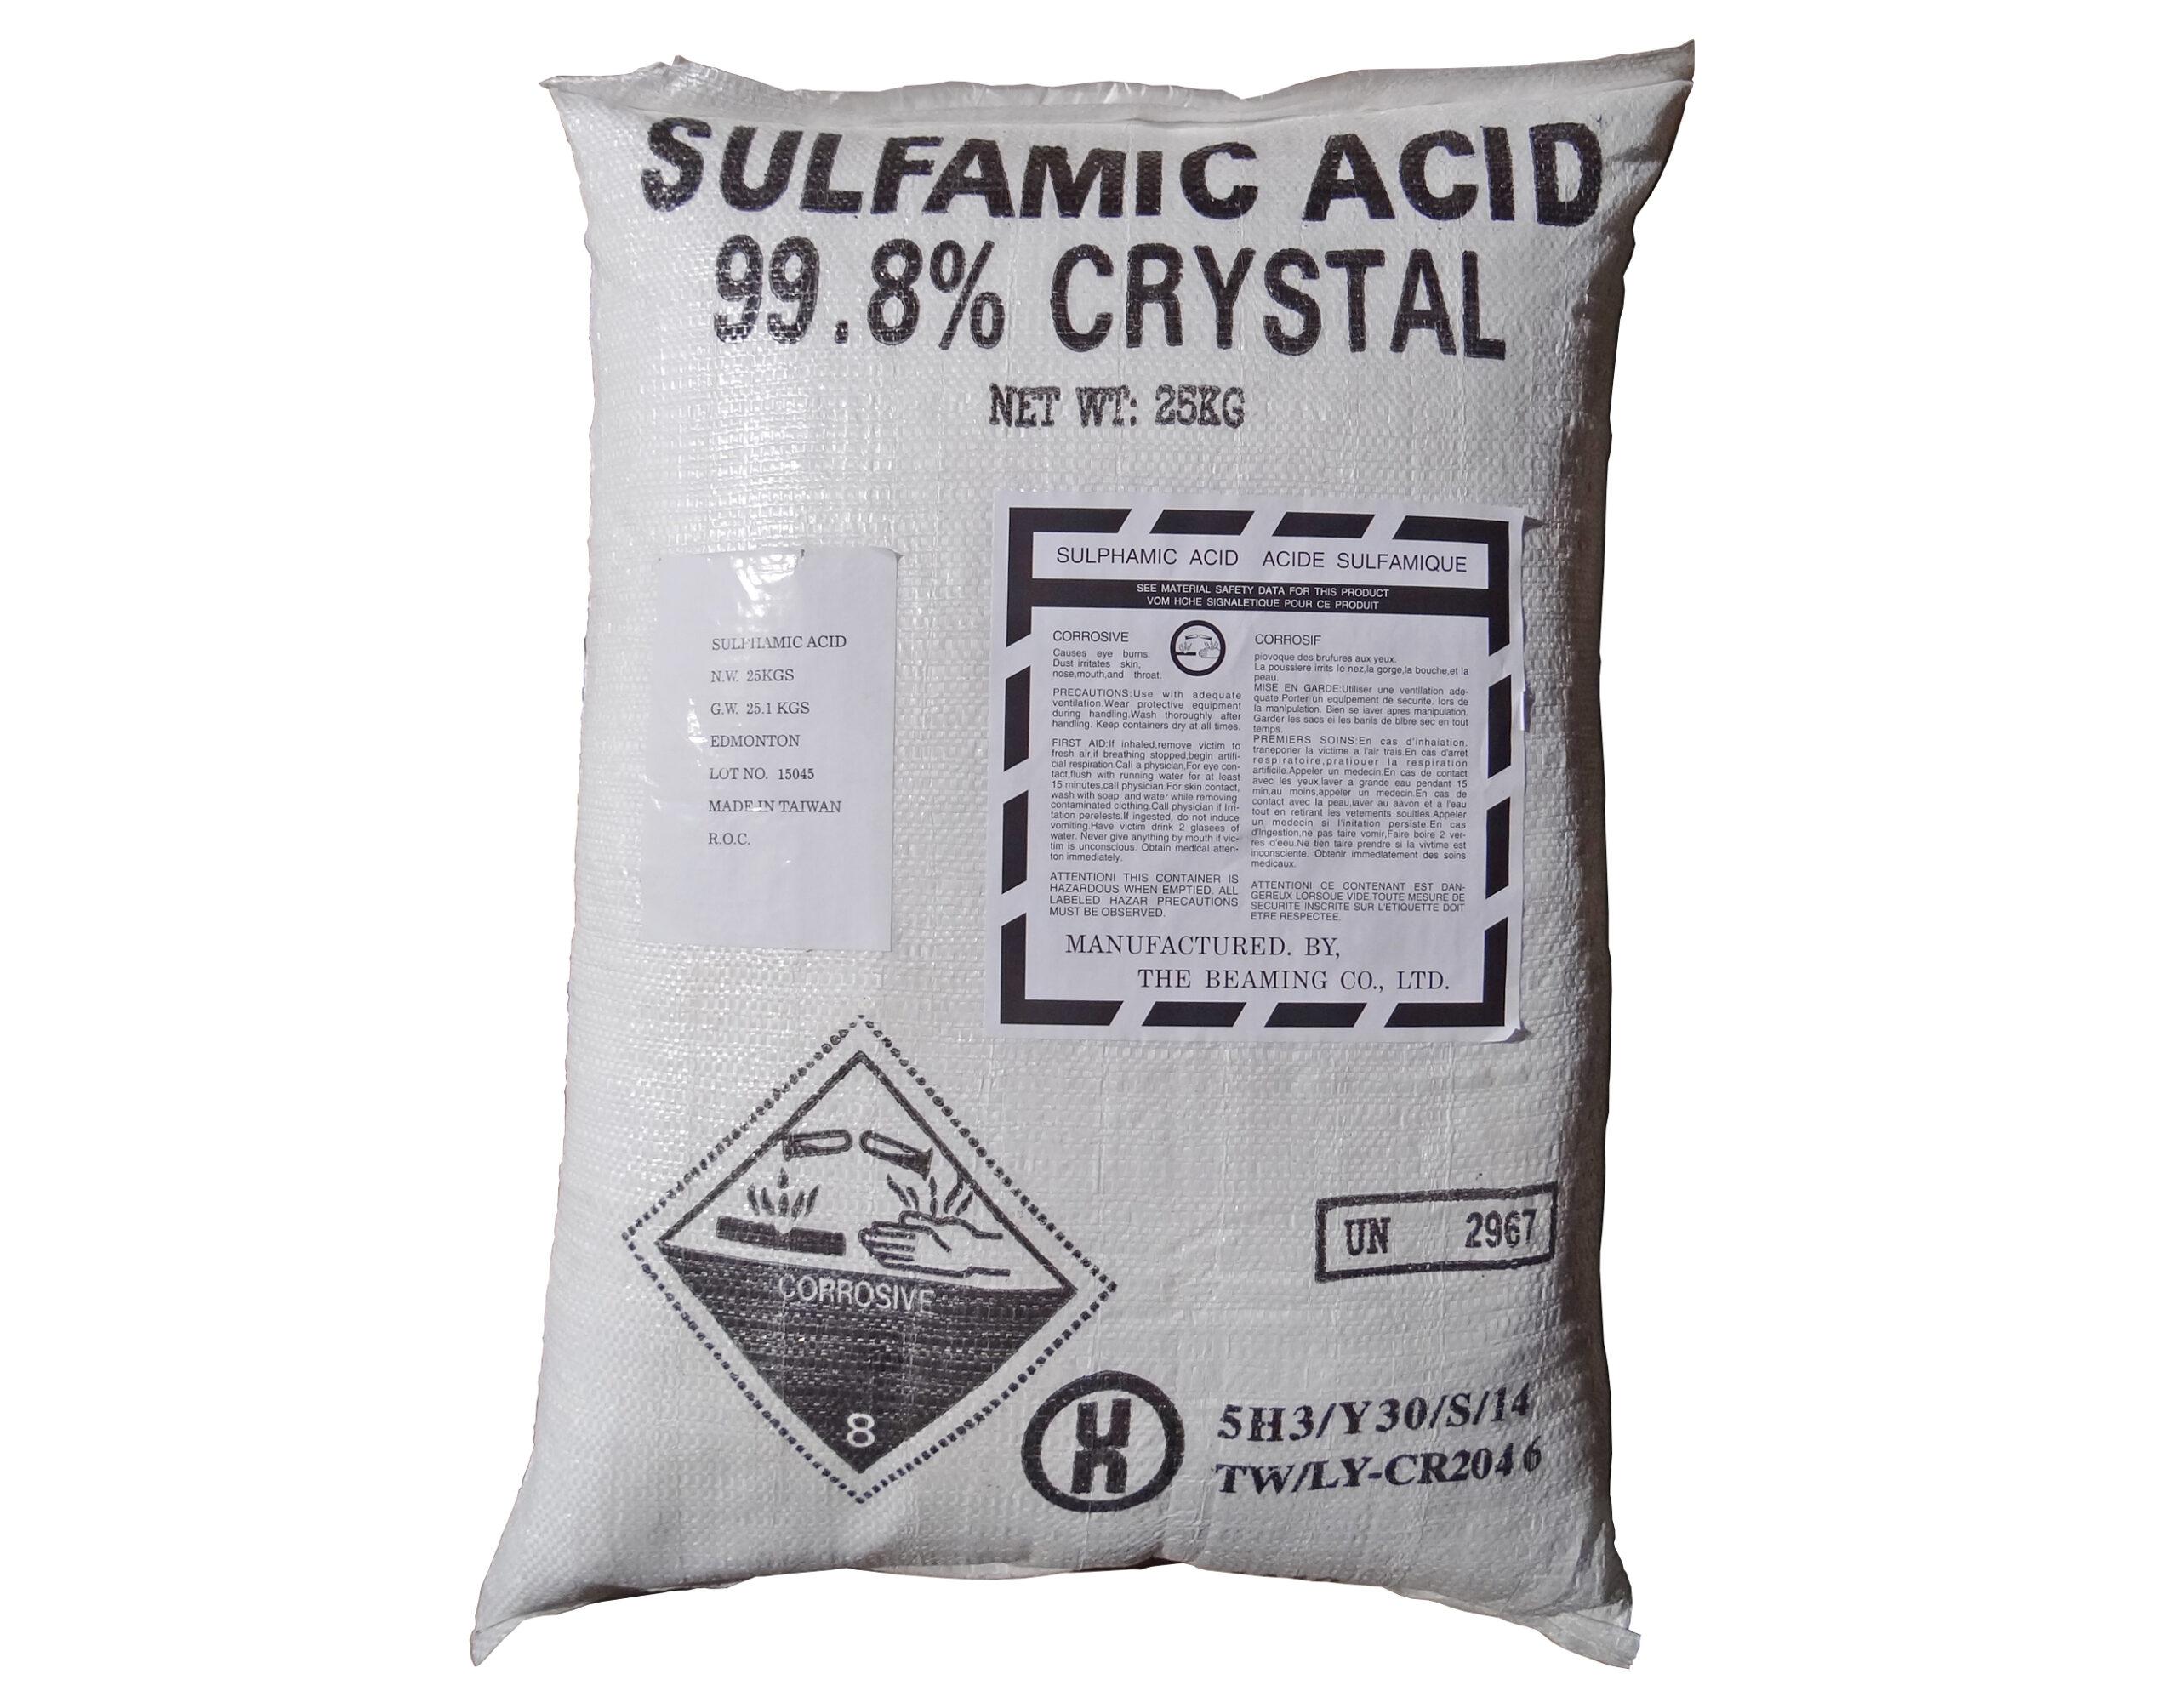 A white bag of sulfamic acid with the text: “Sulfamic Acid. 99.8% crystal. Net Wt. 15KG.”